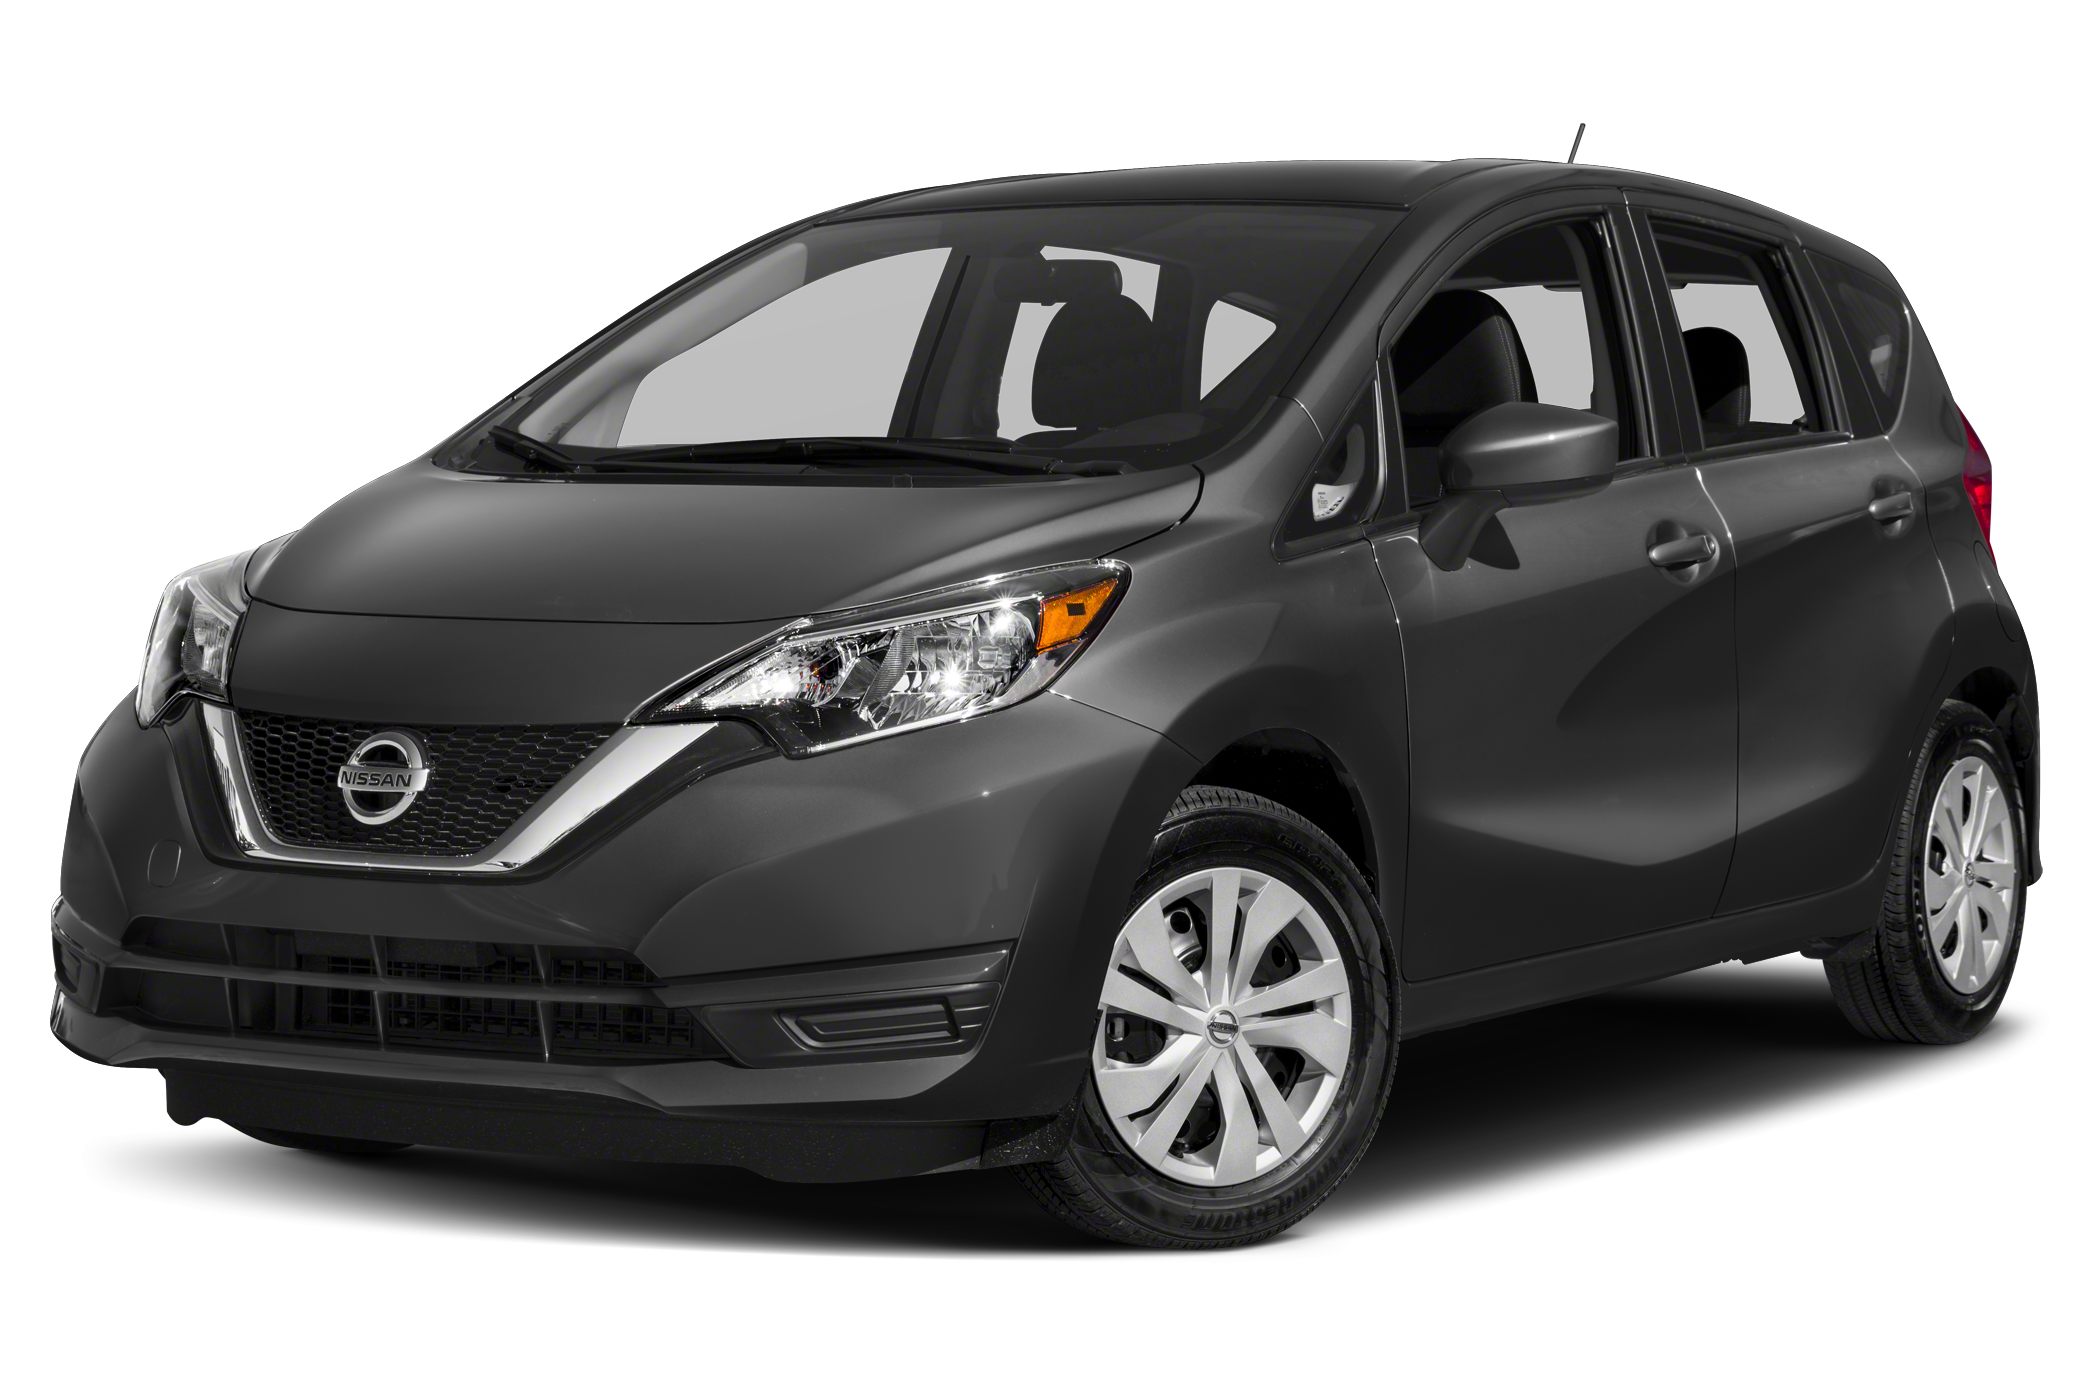 2019 Nissan Versa Note Pictures